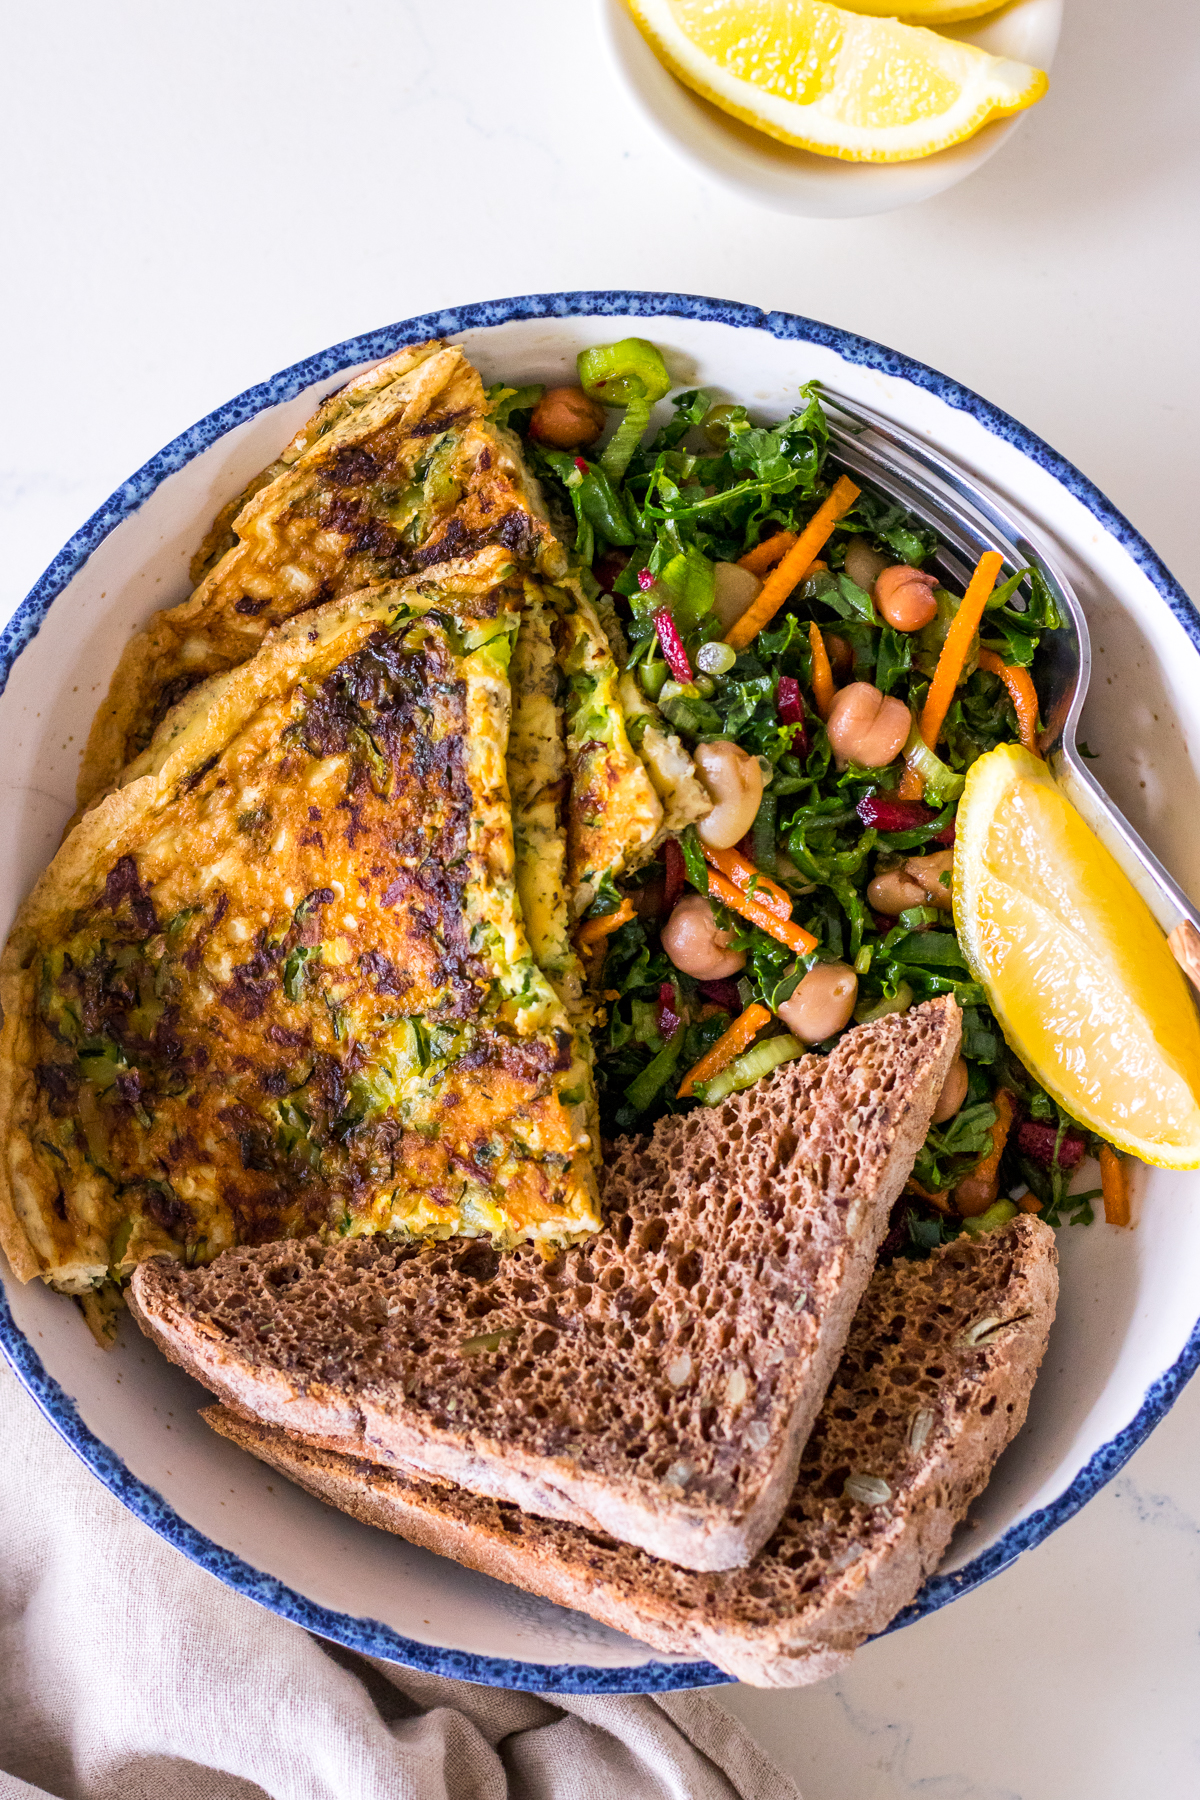 Zucchini herb omelette sliced in a bowl with brown toast and kale salad